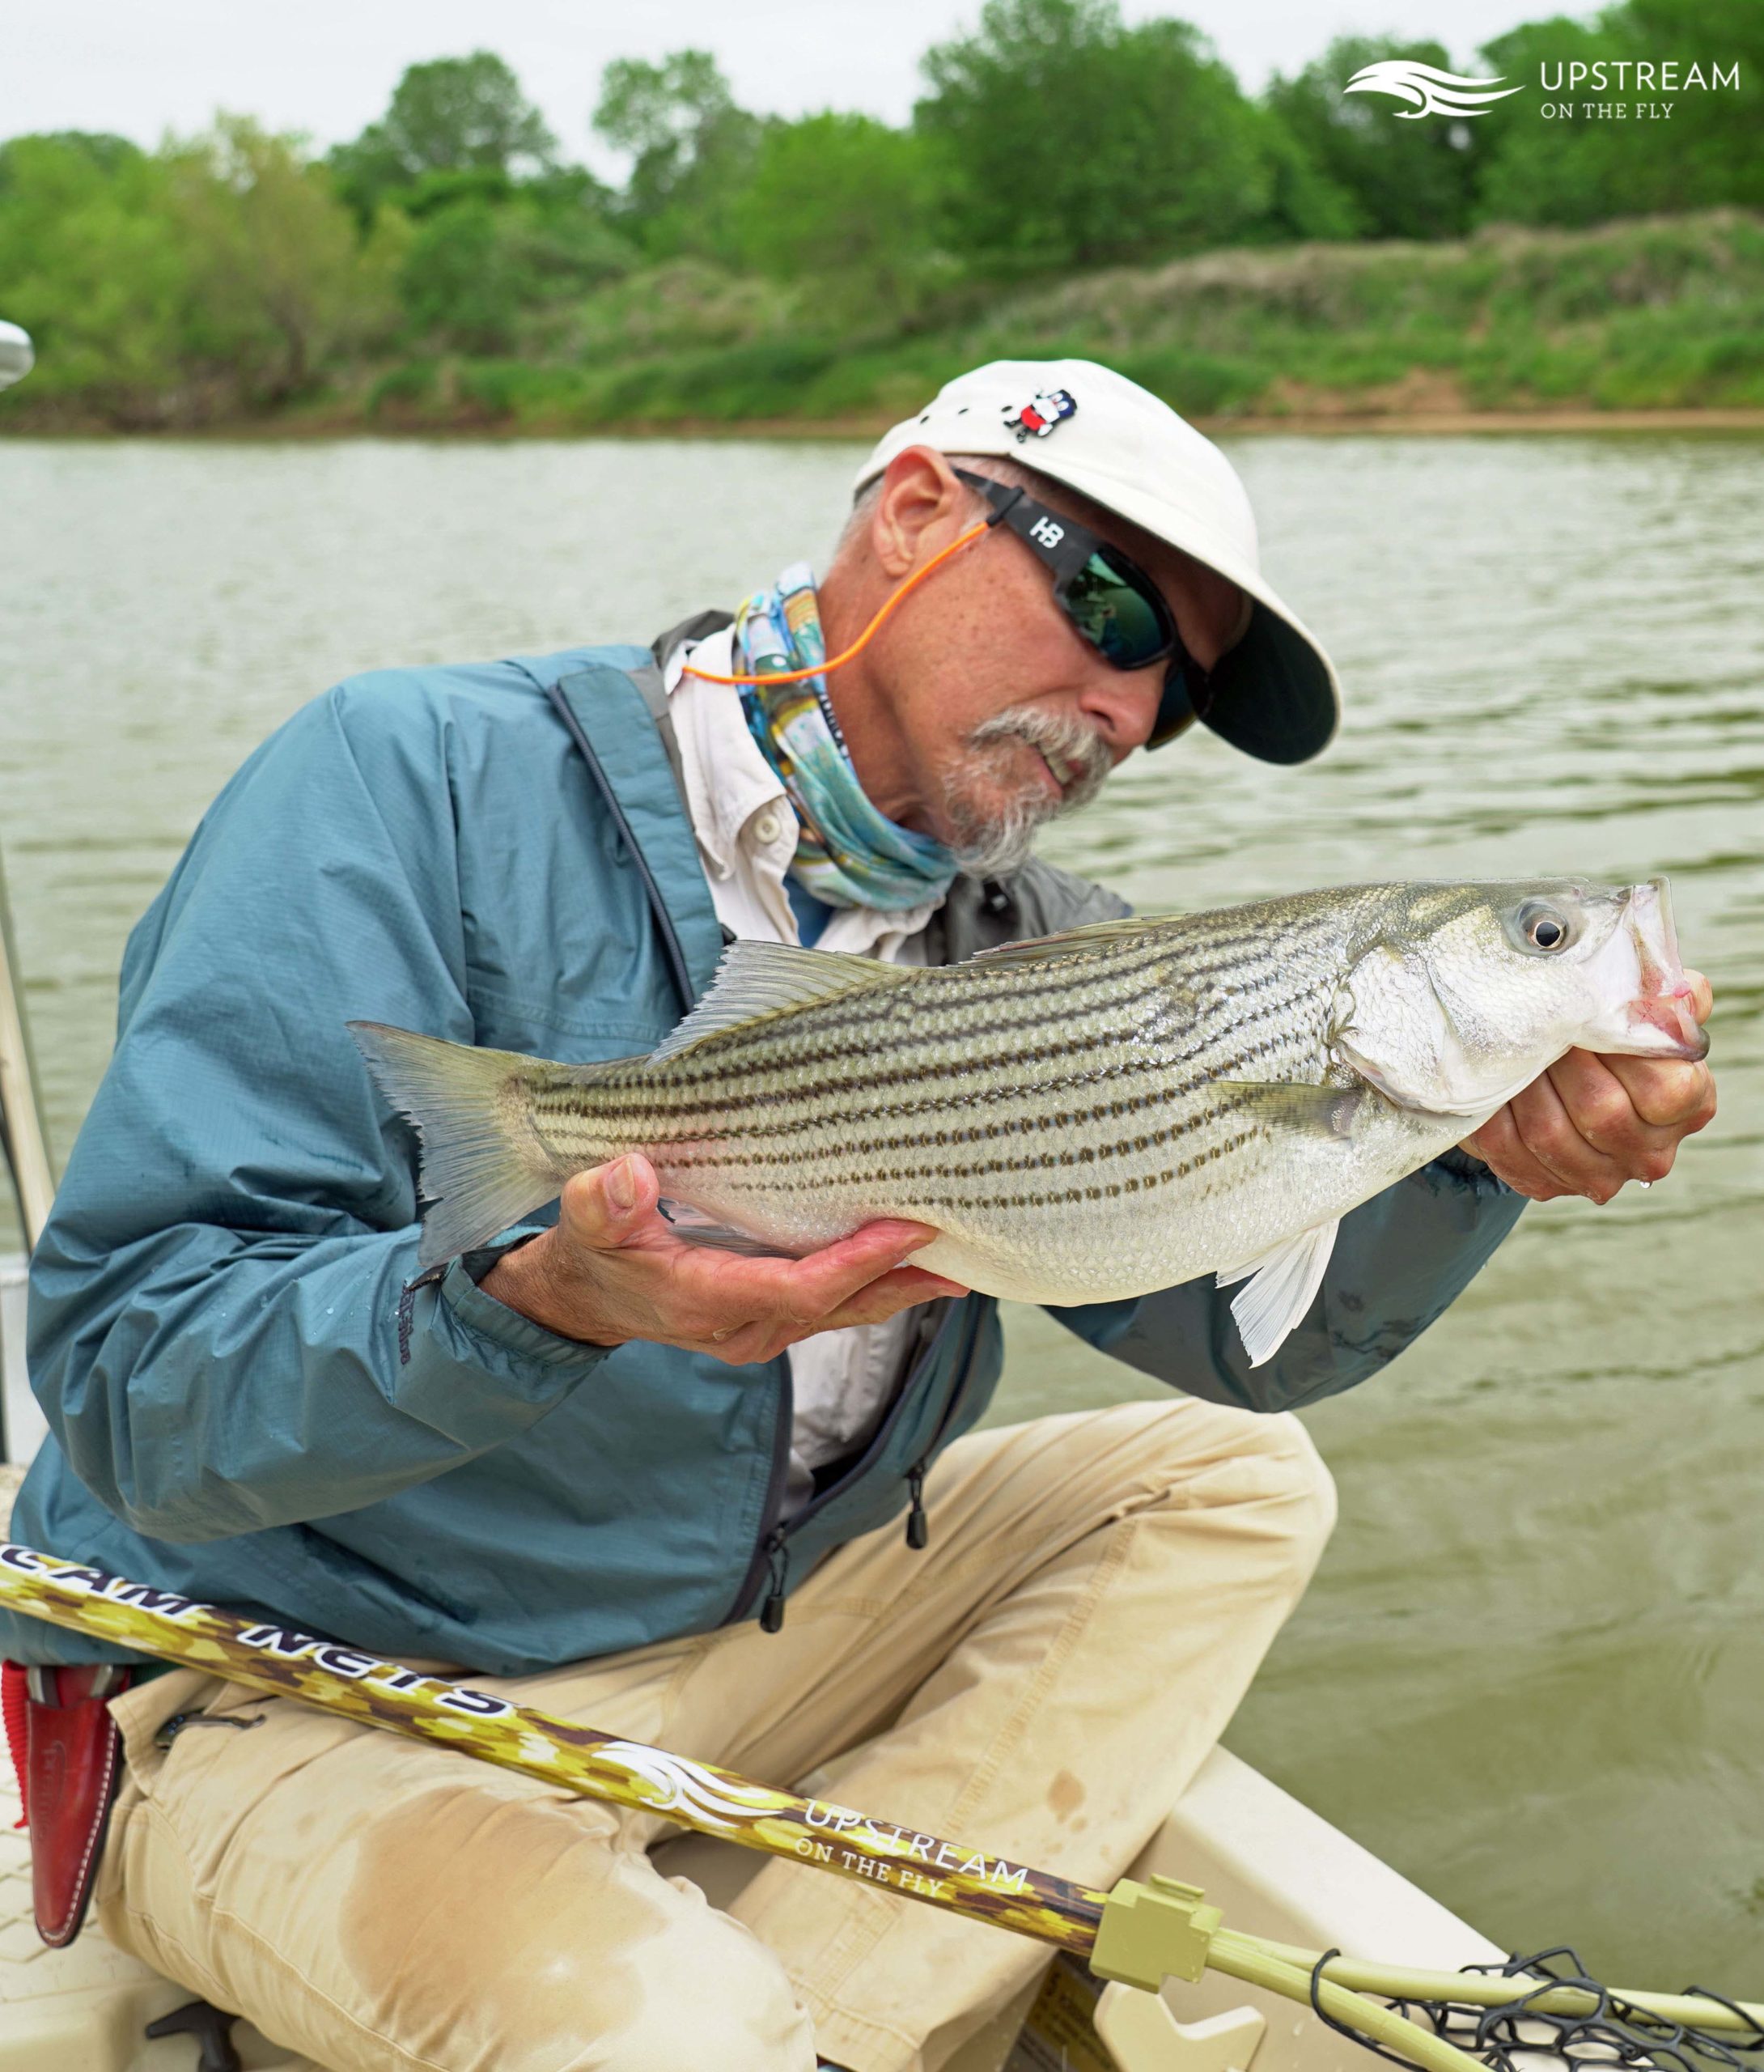 Fly Fishing the Brazos River - Upstream On The Fly